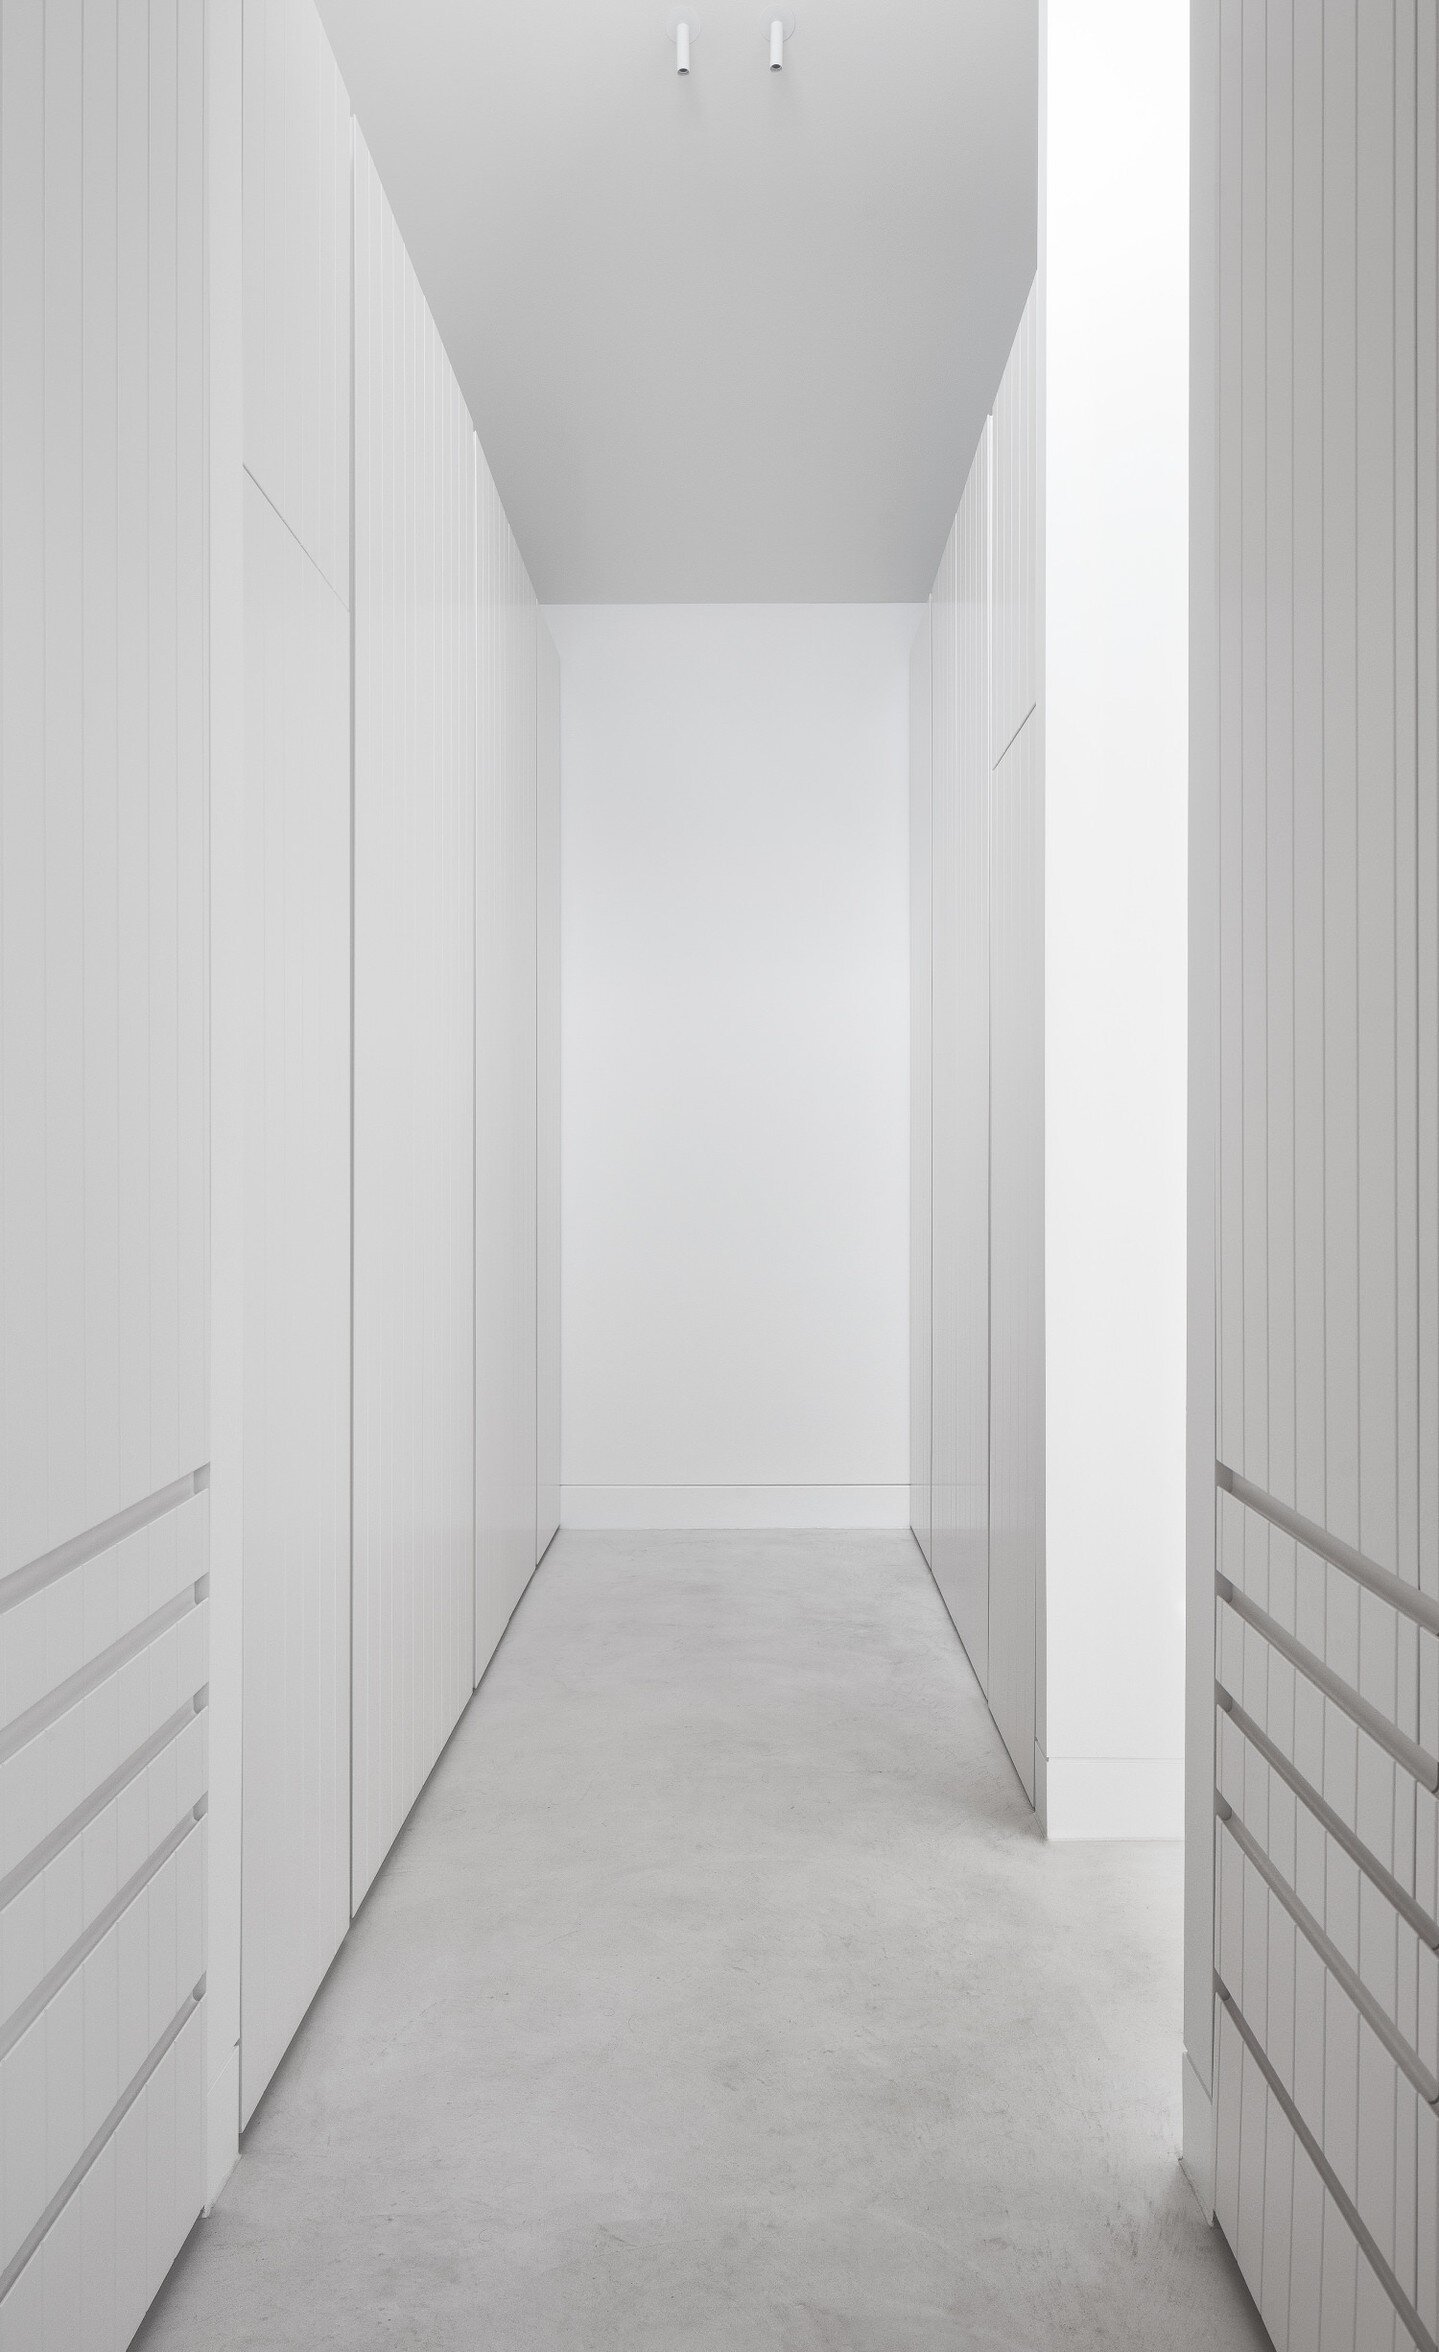 A range of different surfaces in an all-white palette creates a seamless uniformity at J318.

A&amp;D @cerastribley
Photography @emily_bartlett_photography